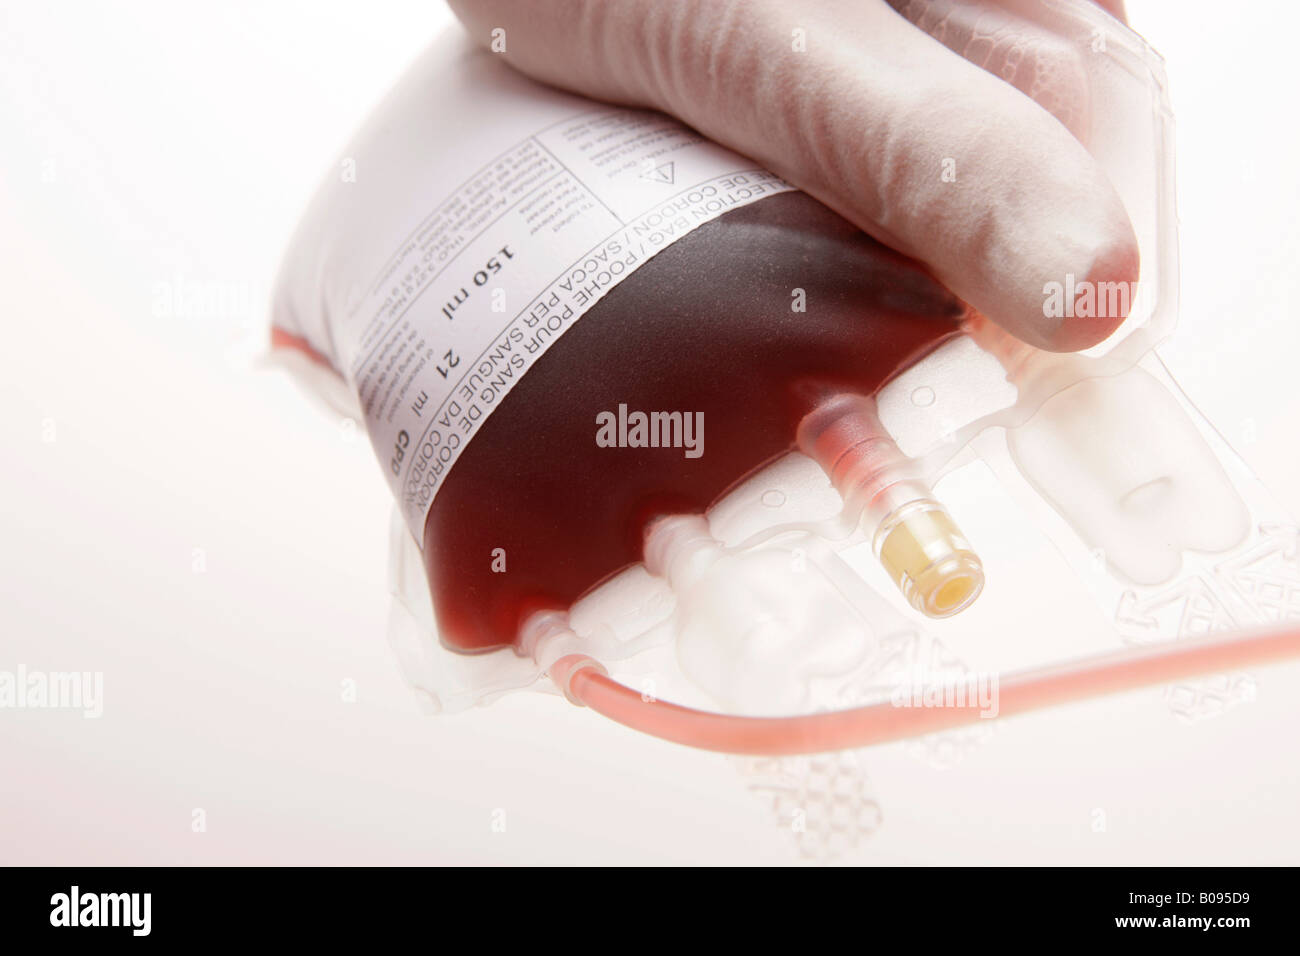 Gloved hand holding blood unit, unit of blood Stock Photo